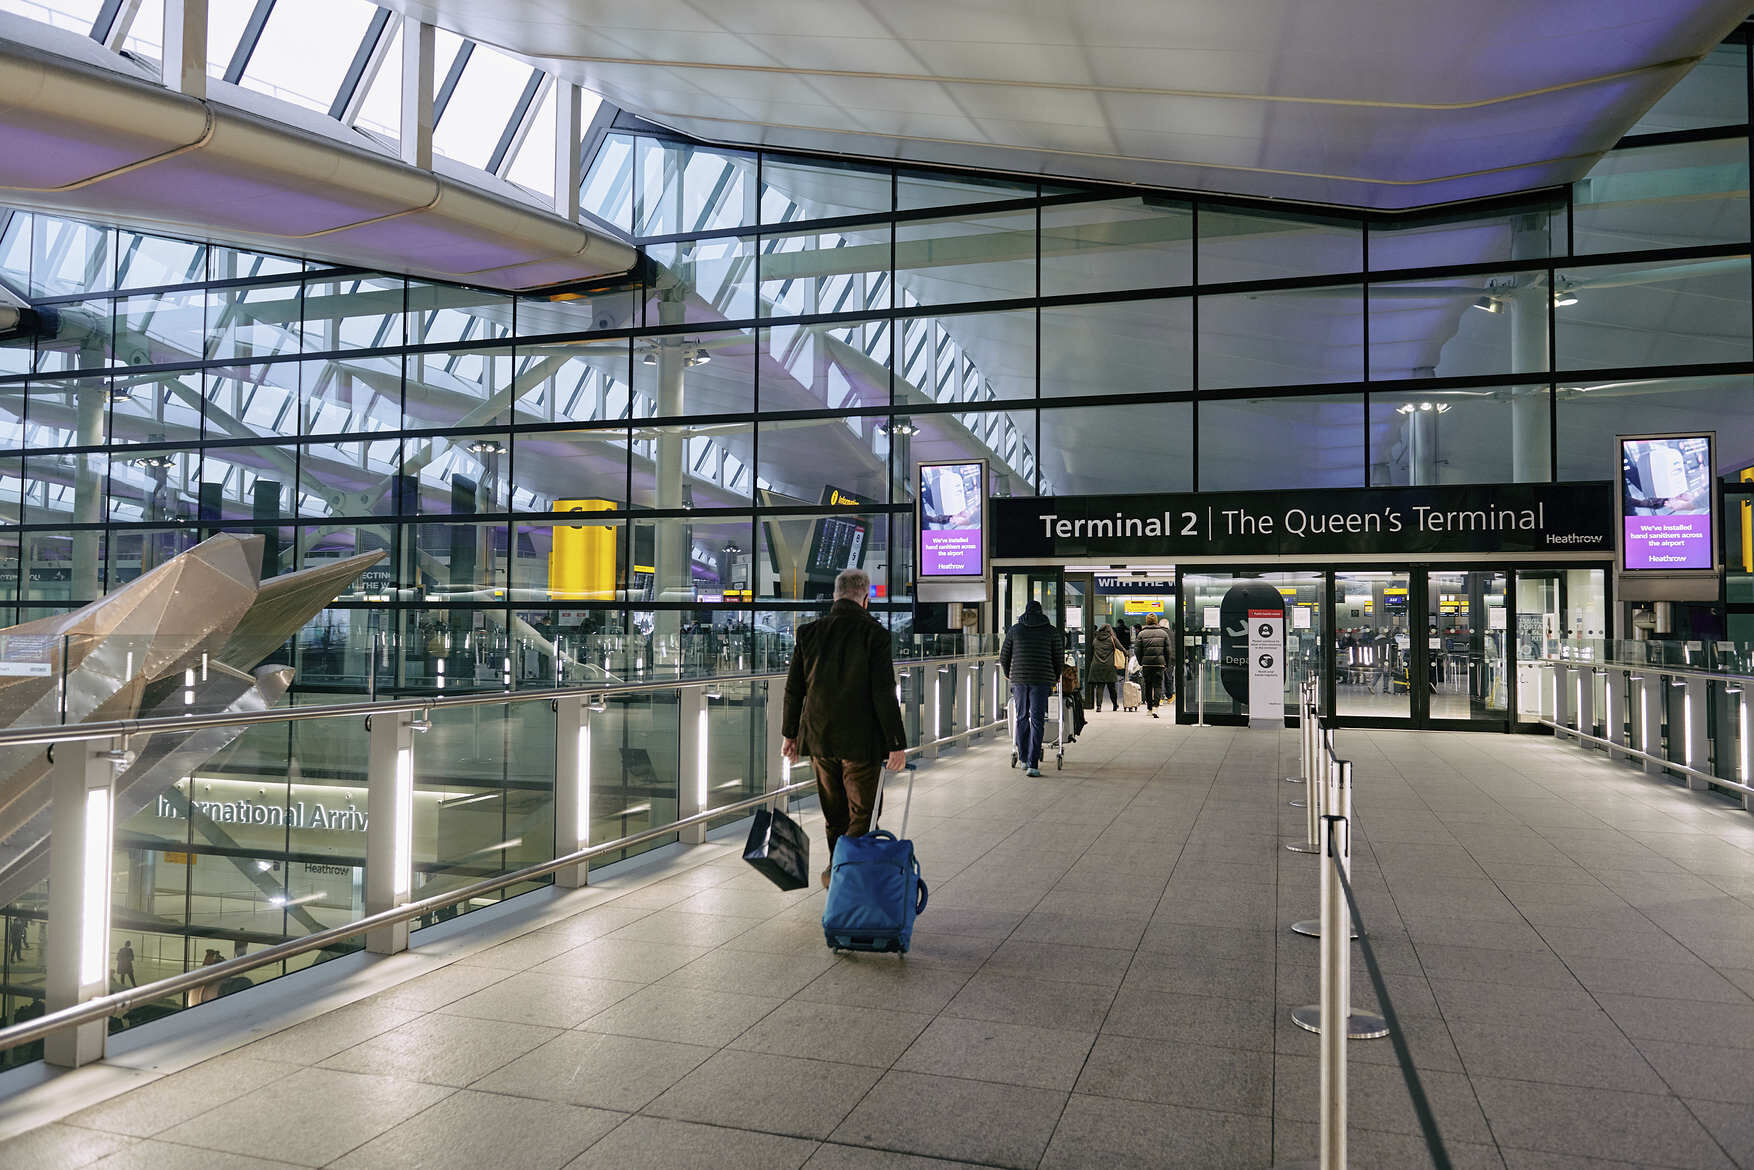 Updated  Today !  Heathrow  Airport  has  extended  the  Daily  Cap of  100,000 travellers  until  October 29  !